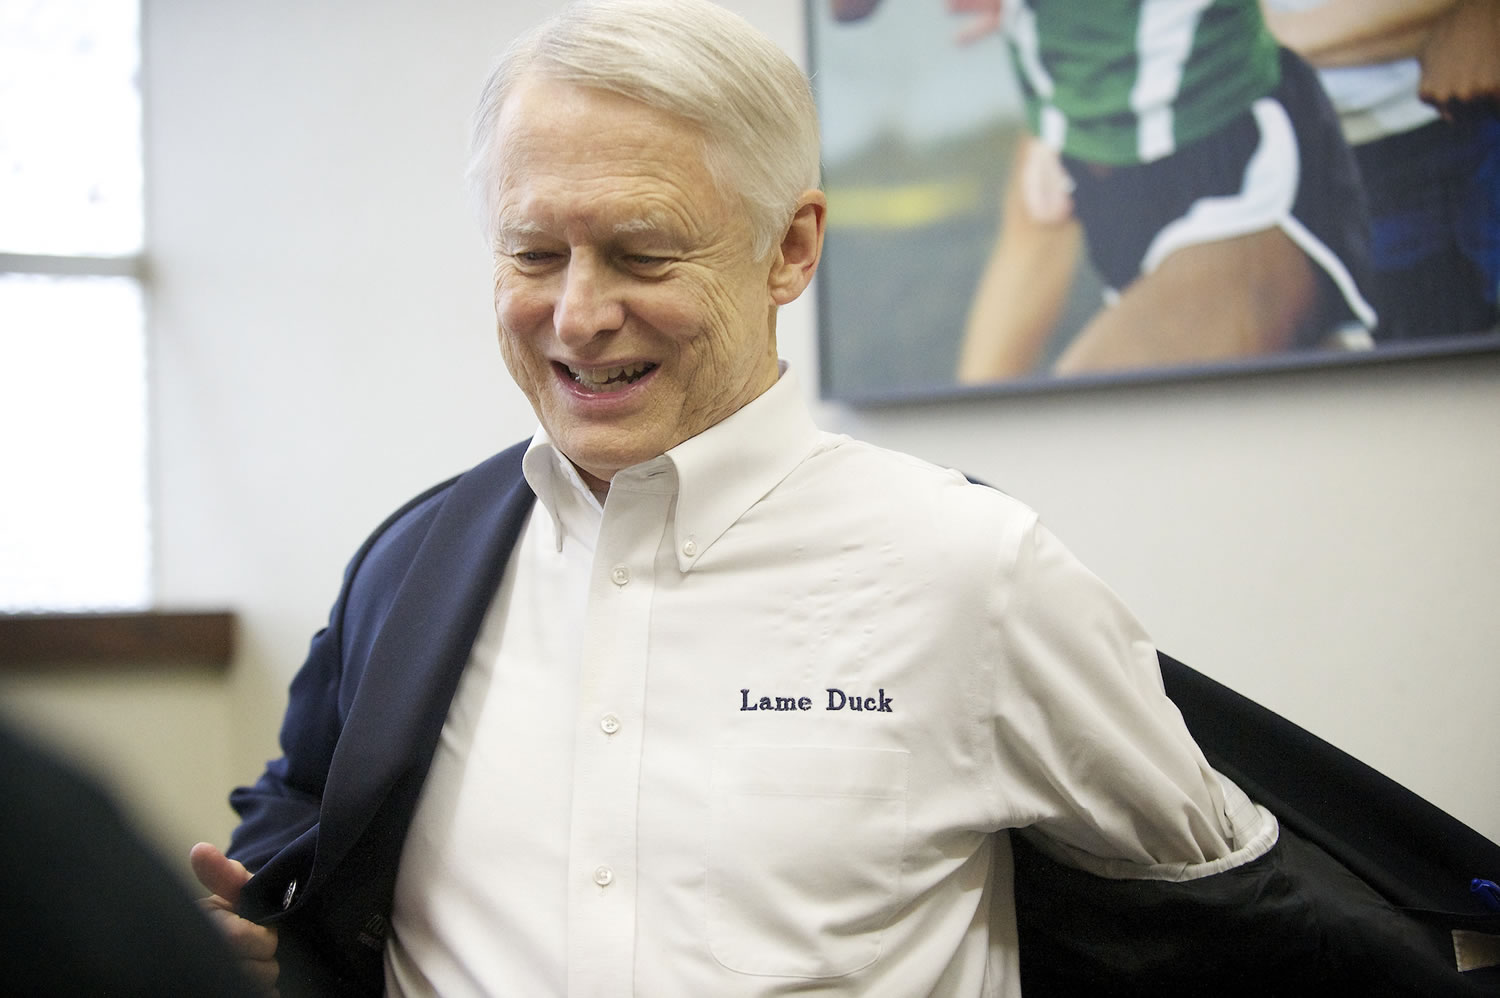 During his Vancouver visit Wednesday, Secretary of State Sam Reed sported a white button up shirt with the words &quot;Lame Duck&quot; embroidered above the chest pocket, a humorous reference to the fact that he did not seek re-election.